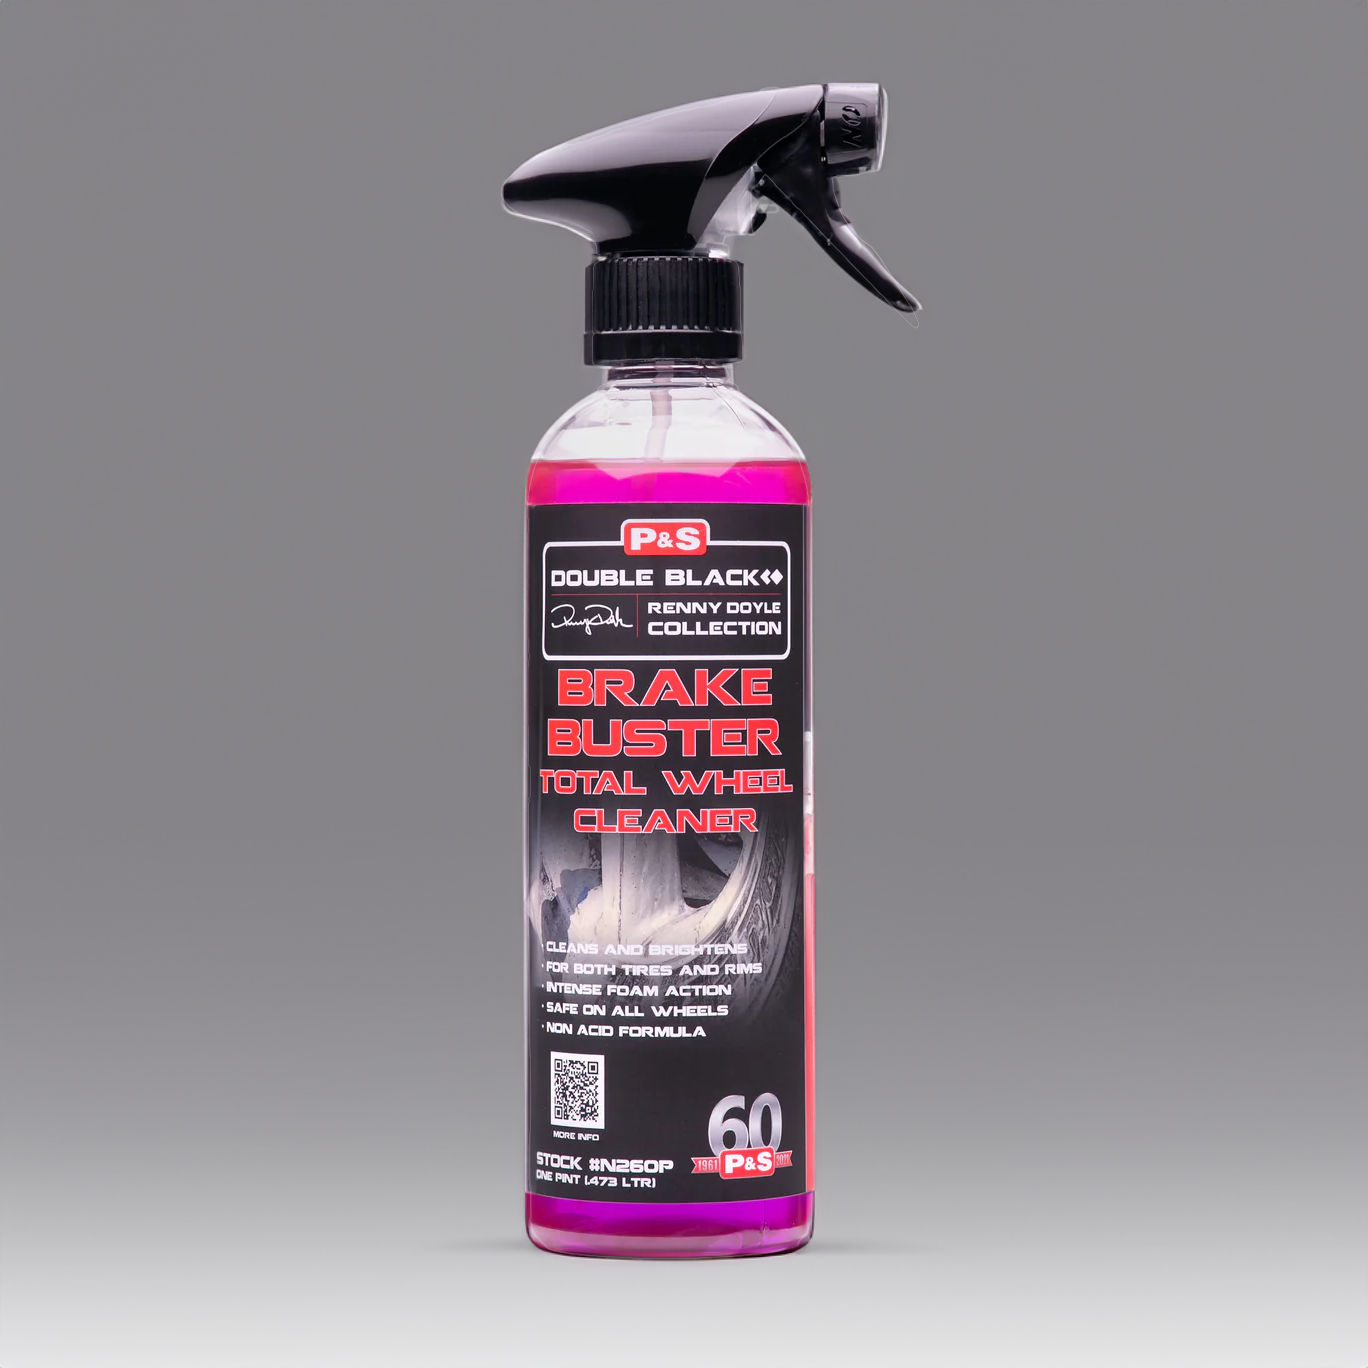 P&S Bead Maker Paint Protectant - Westchester Detailing Supply